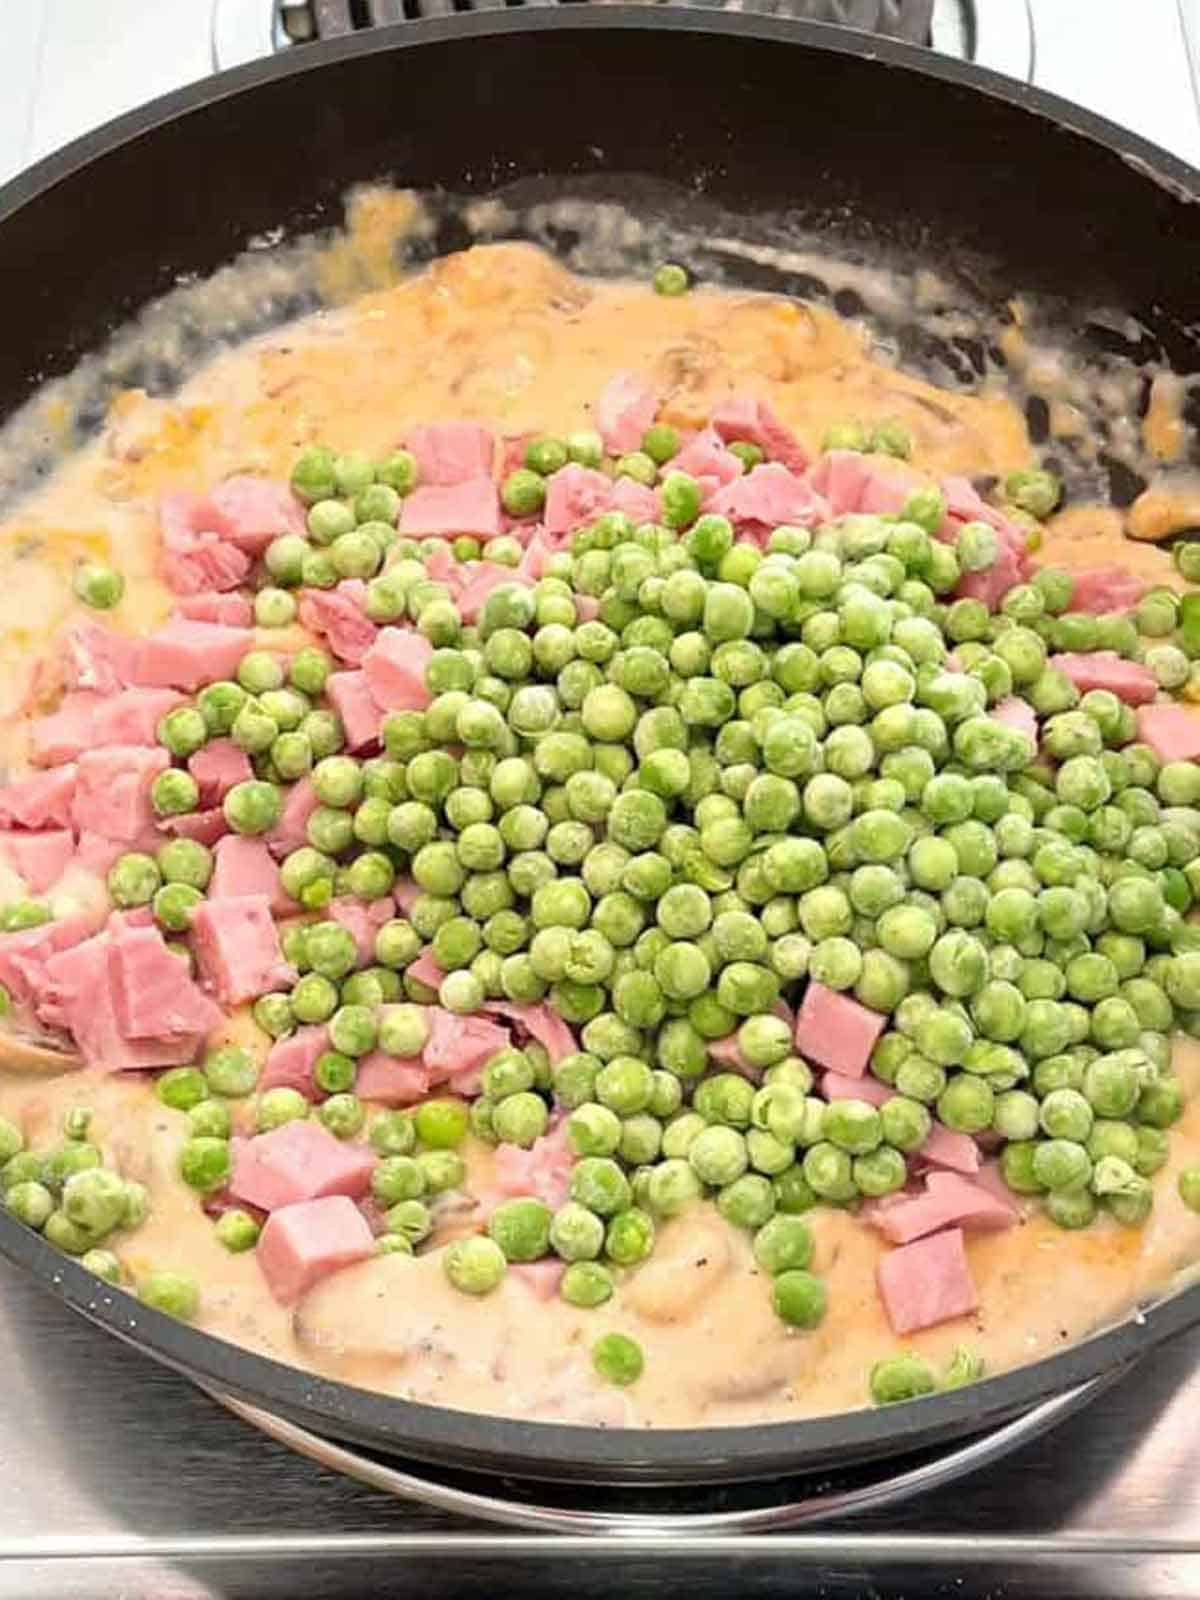 Ham and green peas added to the tetrazzini mixture.